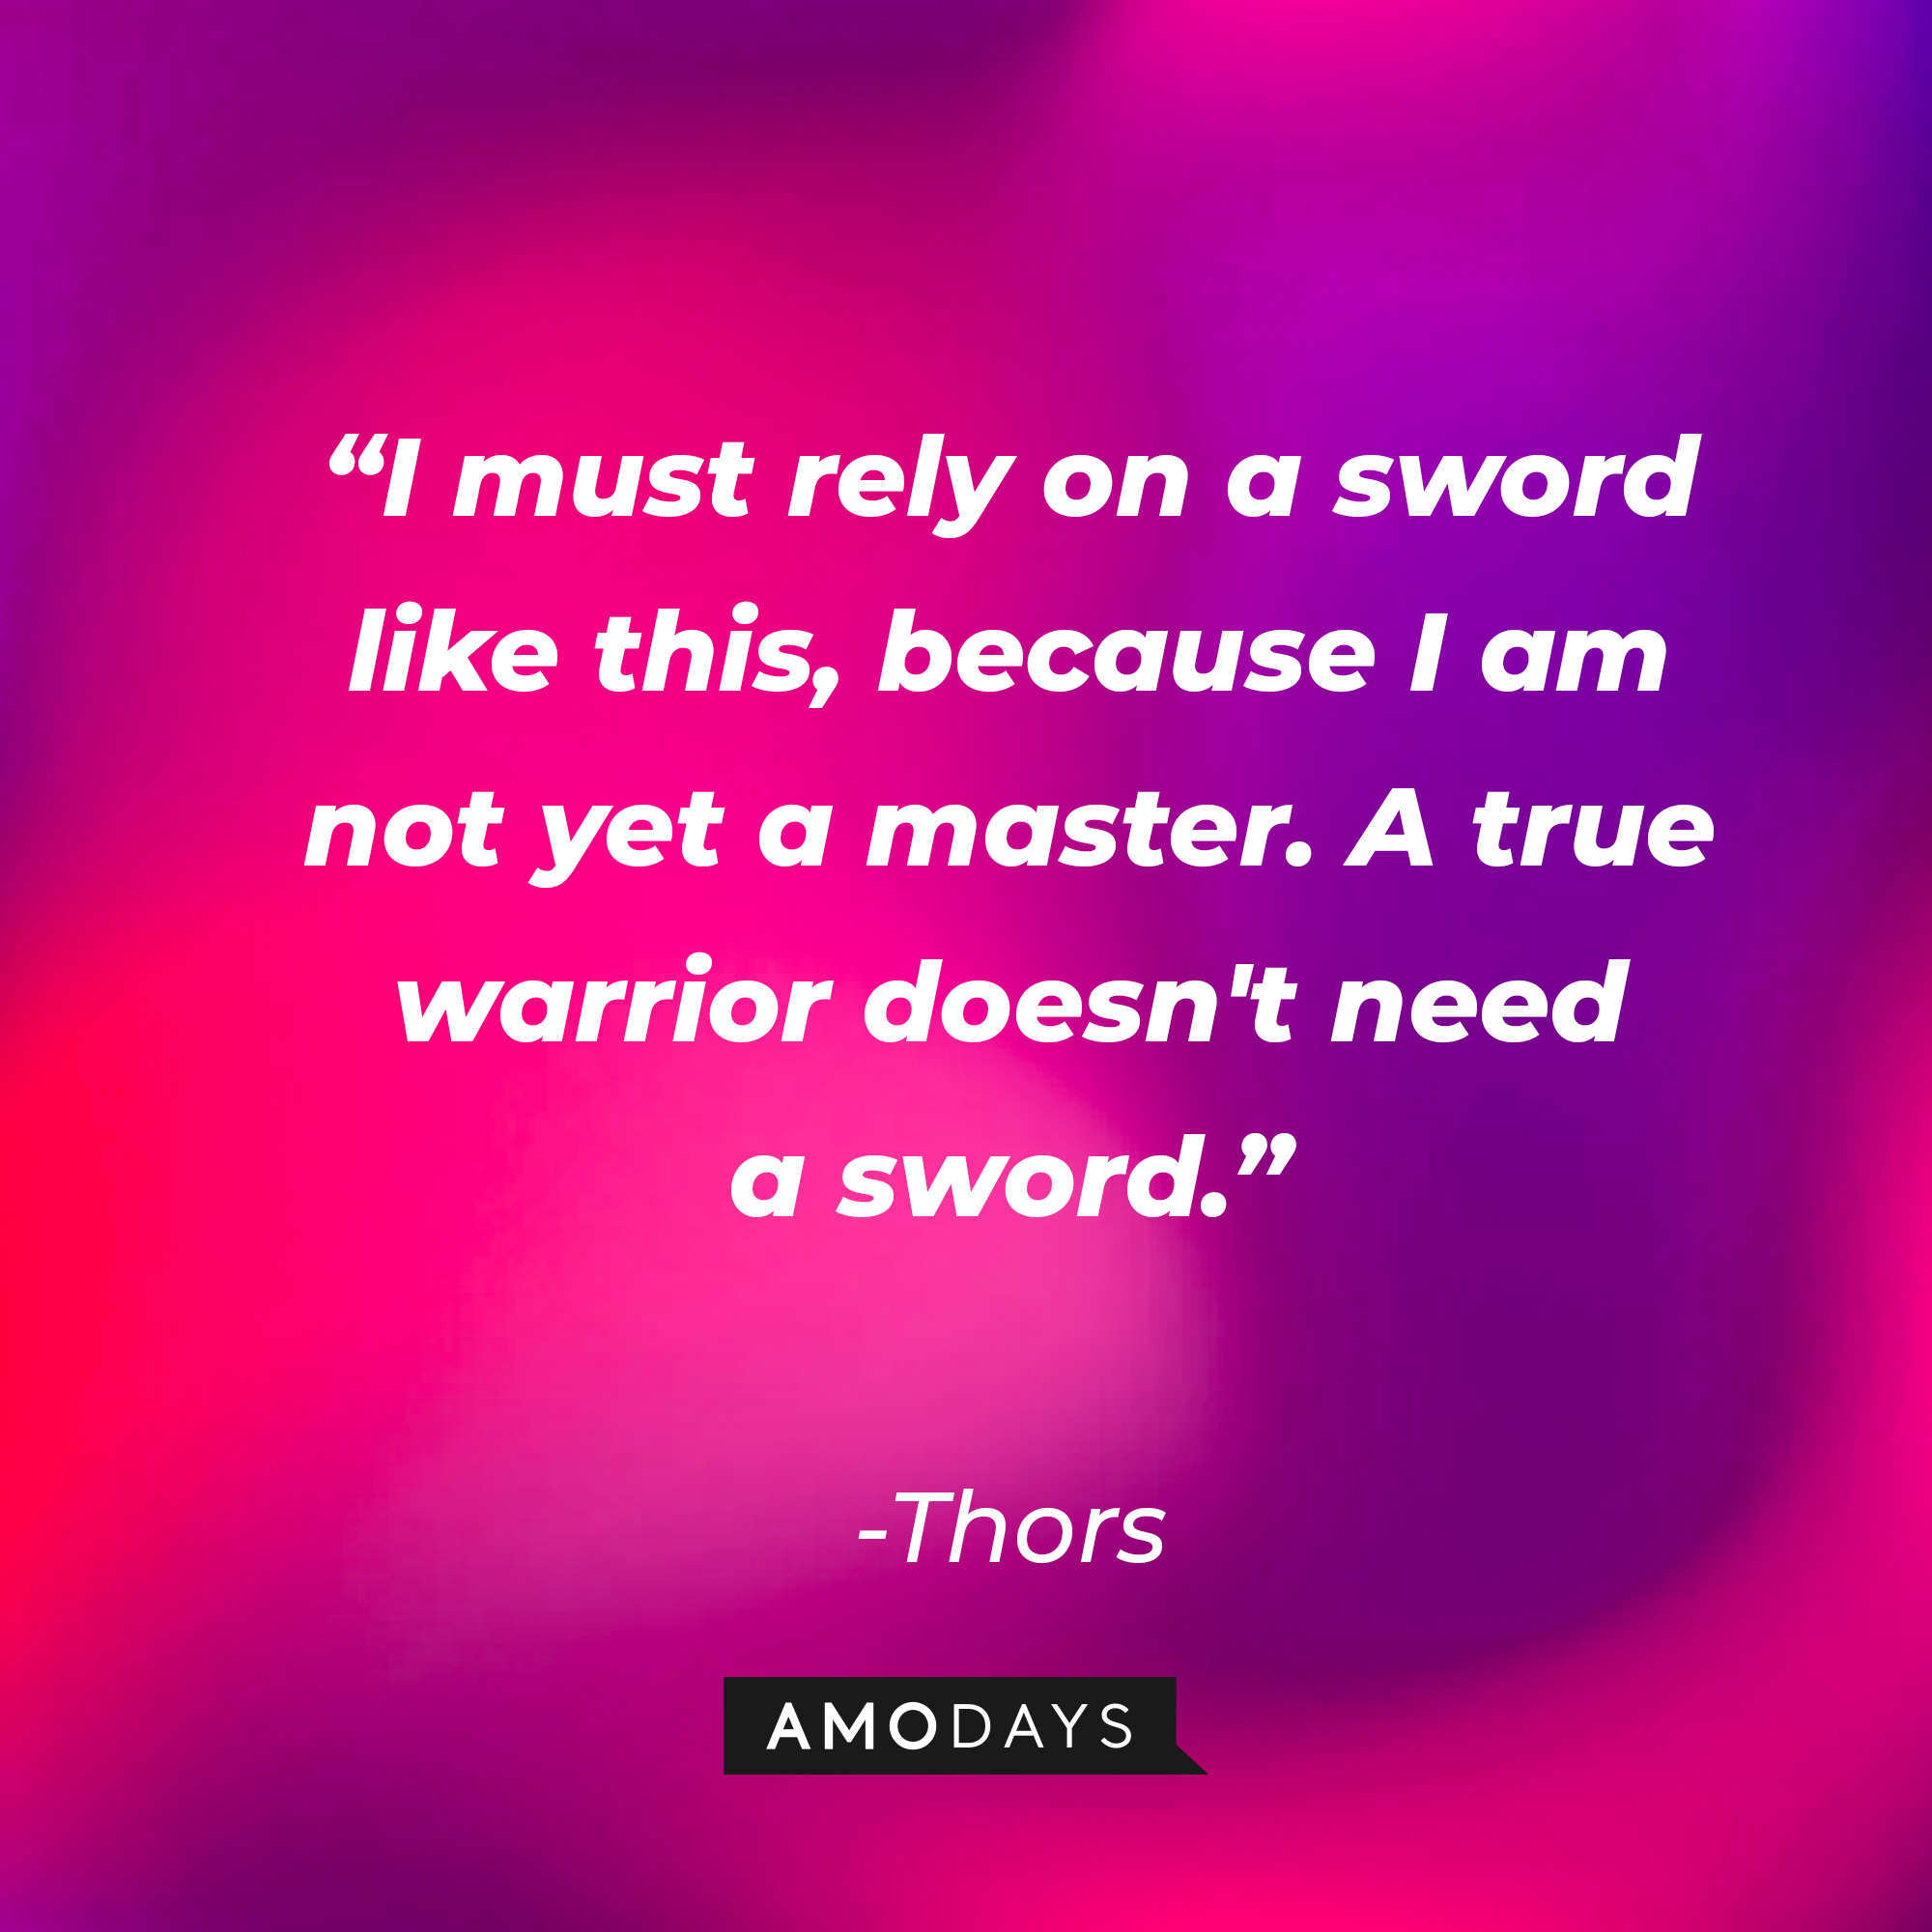 Thors’ quote: “I must rely on a sword like this, because I am not yet a master. A true warrior doesn't need a sword.” | Source: Amodays